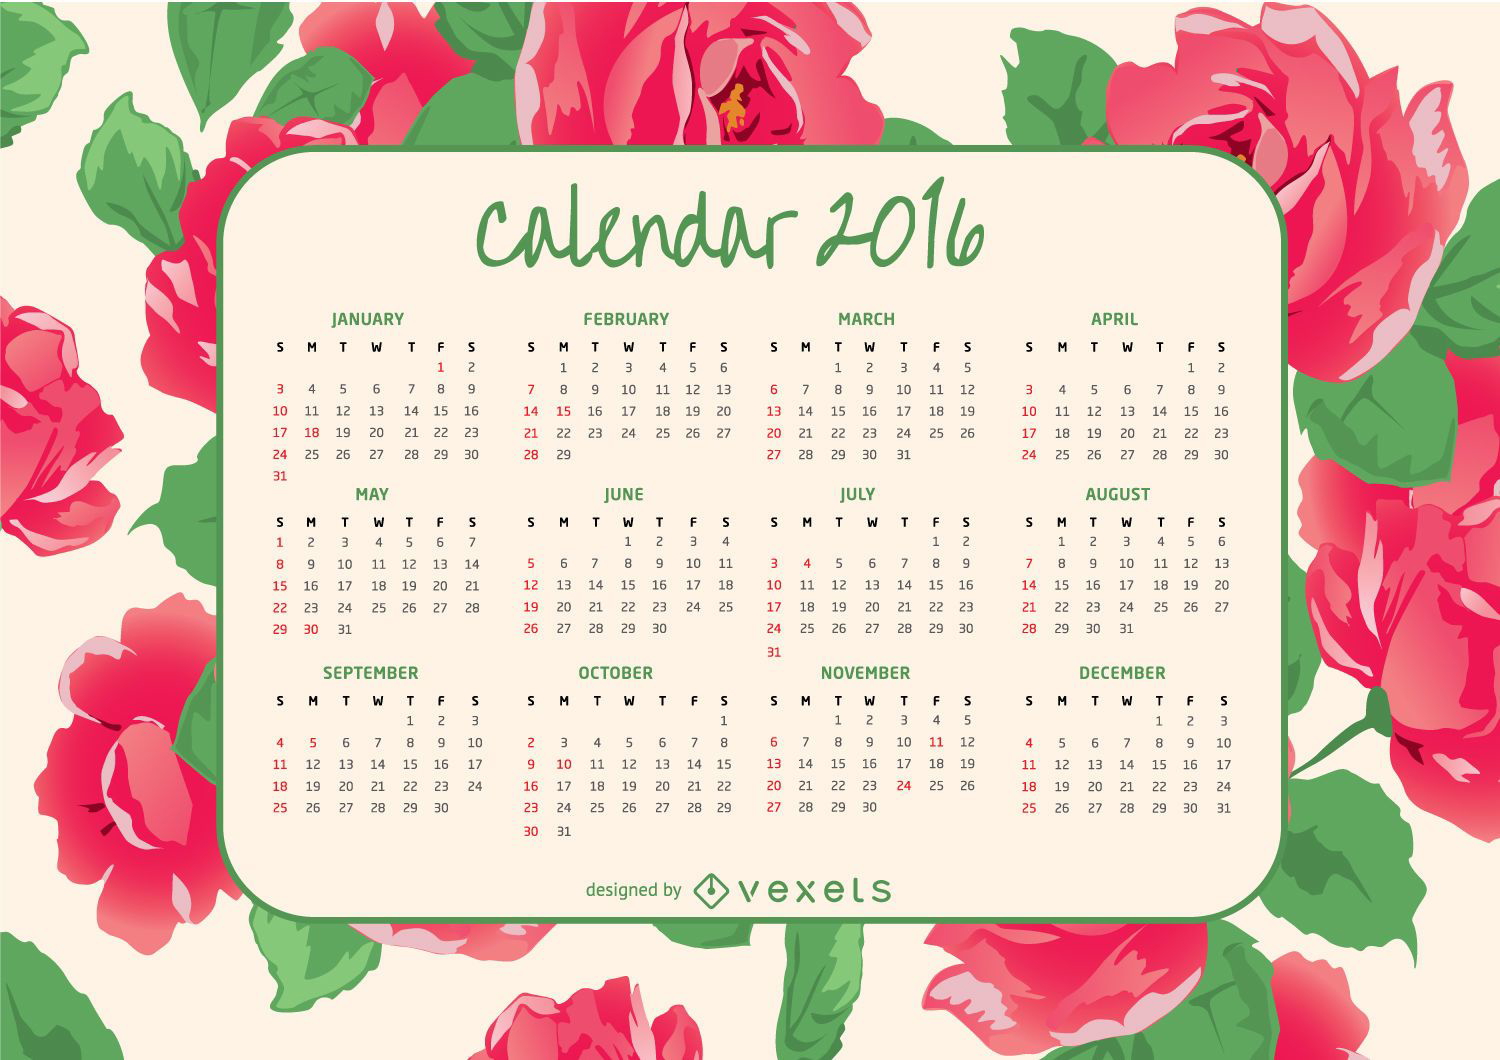 2016 calendar with roses